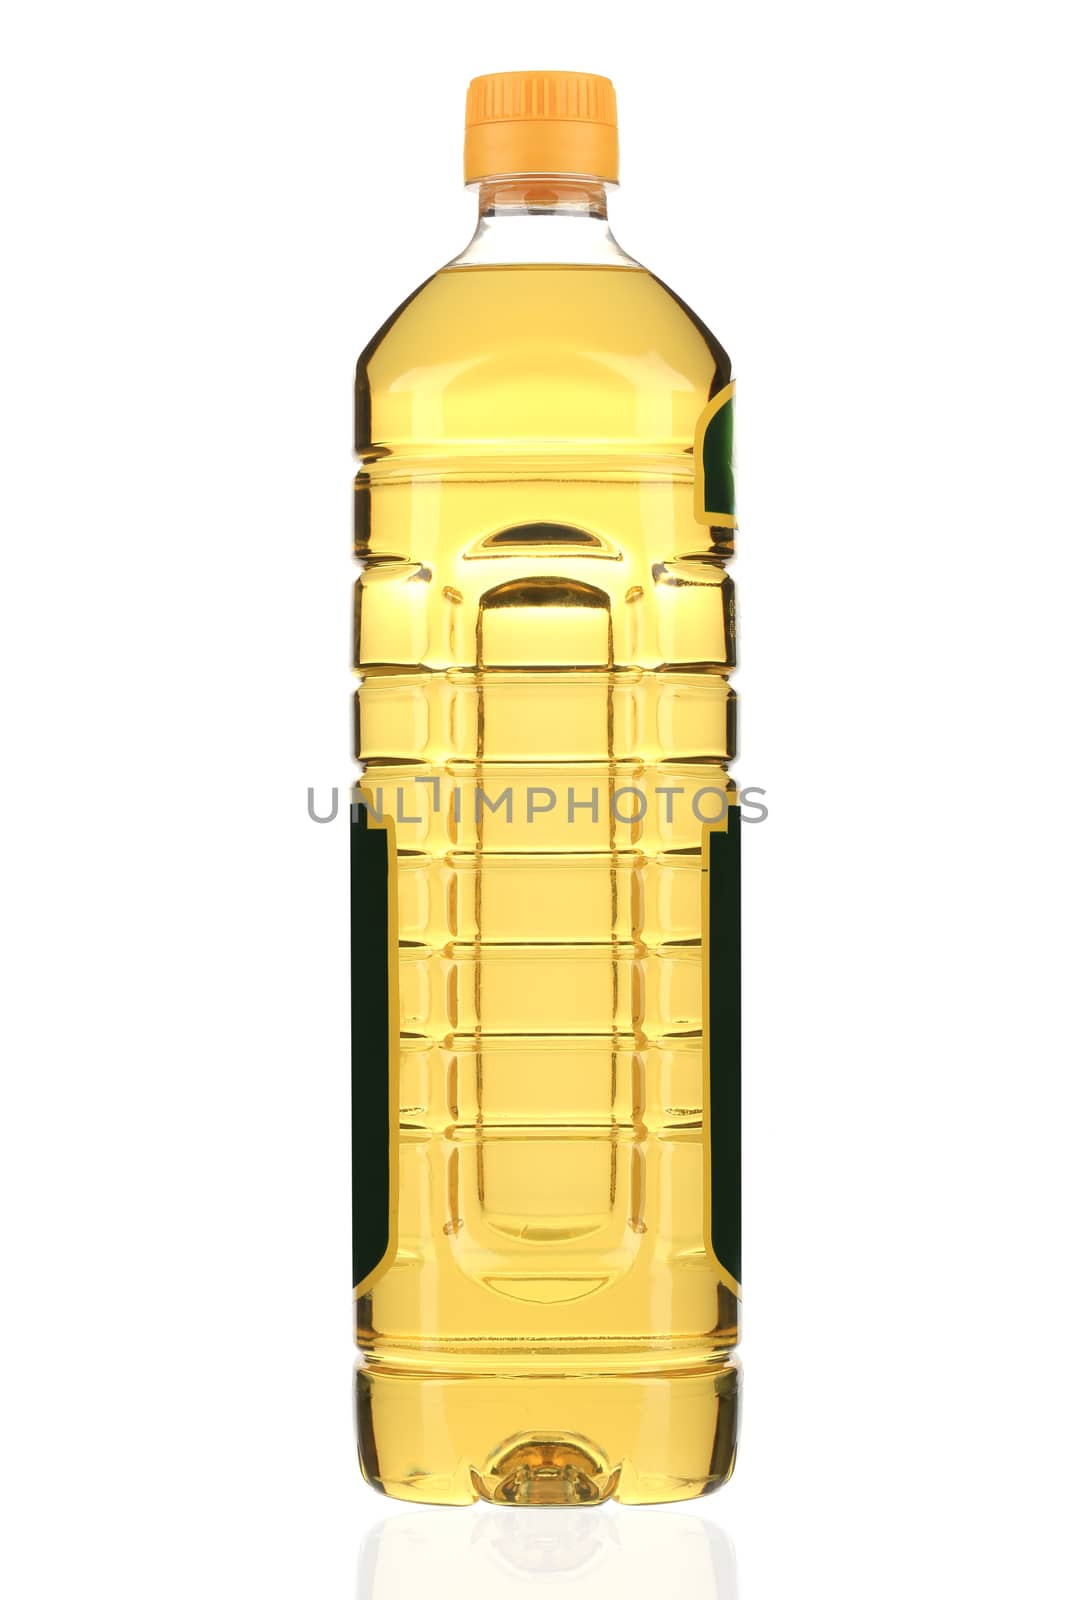 Bottle of sunflower oil. Isolated on a white background.